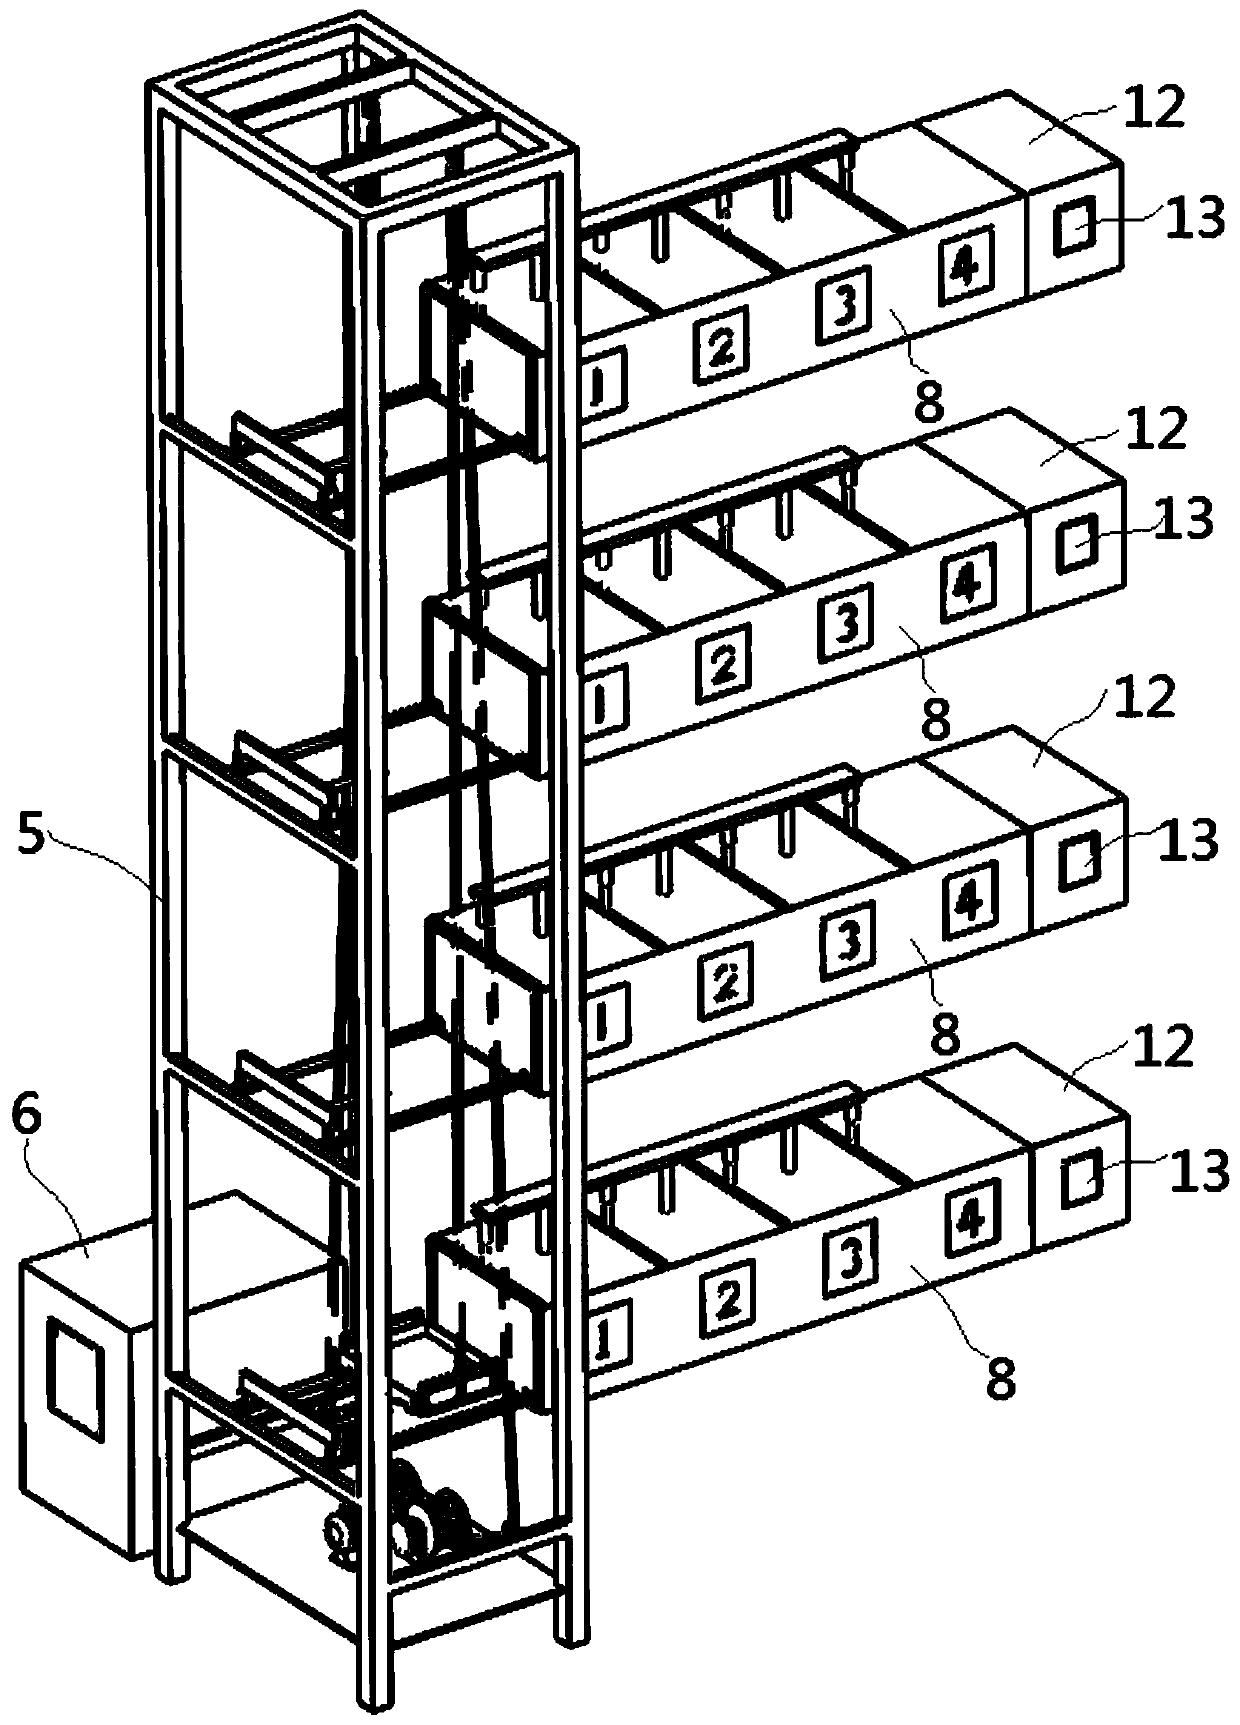 A delivery and storage system for food delivery and its usage method